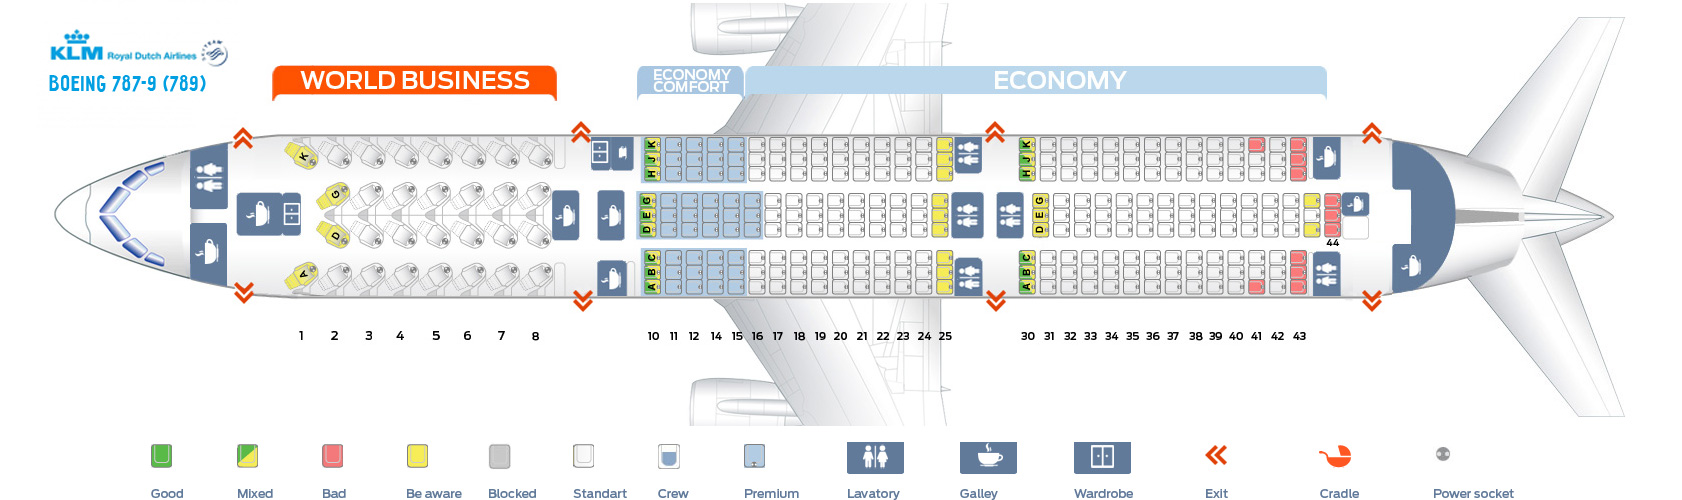 Klm Airlines Seating Chart